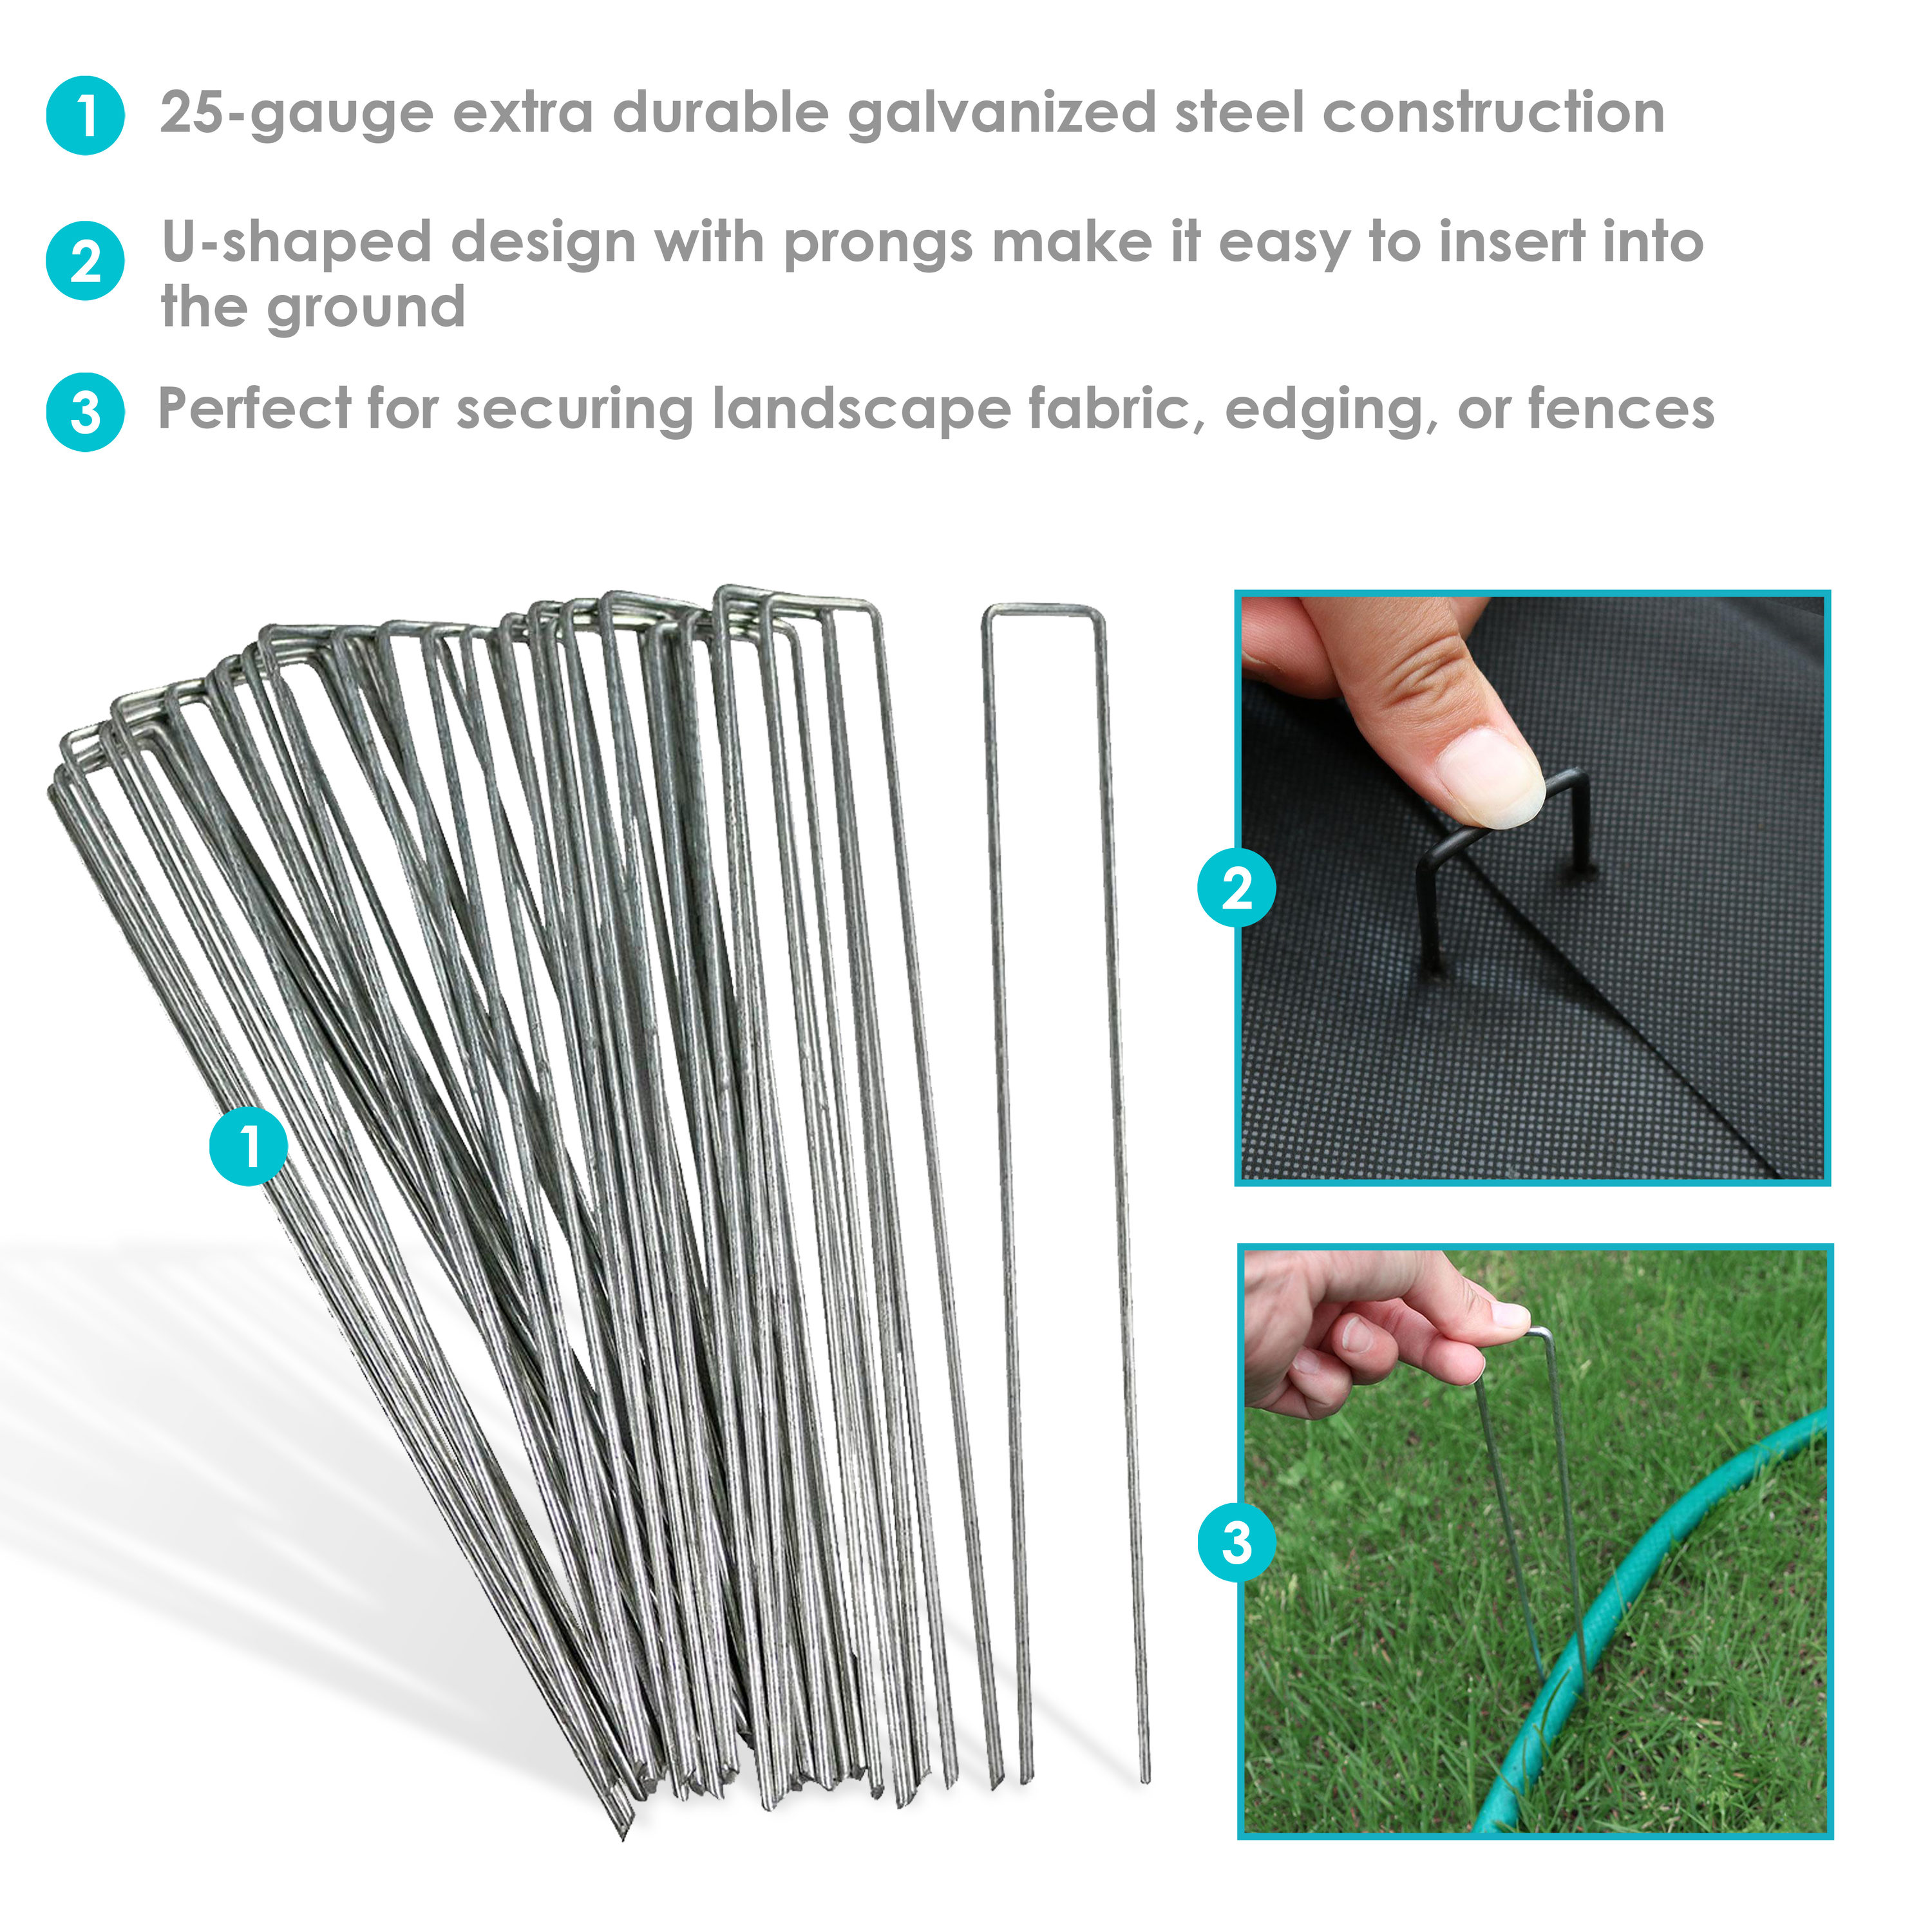 Sliver tarps and More Impactspring 12Inch Garden Stake,30pc Galvanized Landscape Staples Extra Long,Sharp End U-Type Staples Perfect for securing Dog Fences,Weed barriers,Outdoor Wires,Cords,Tents 